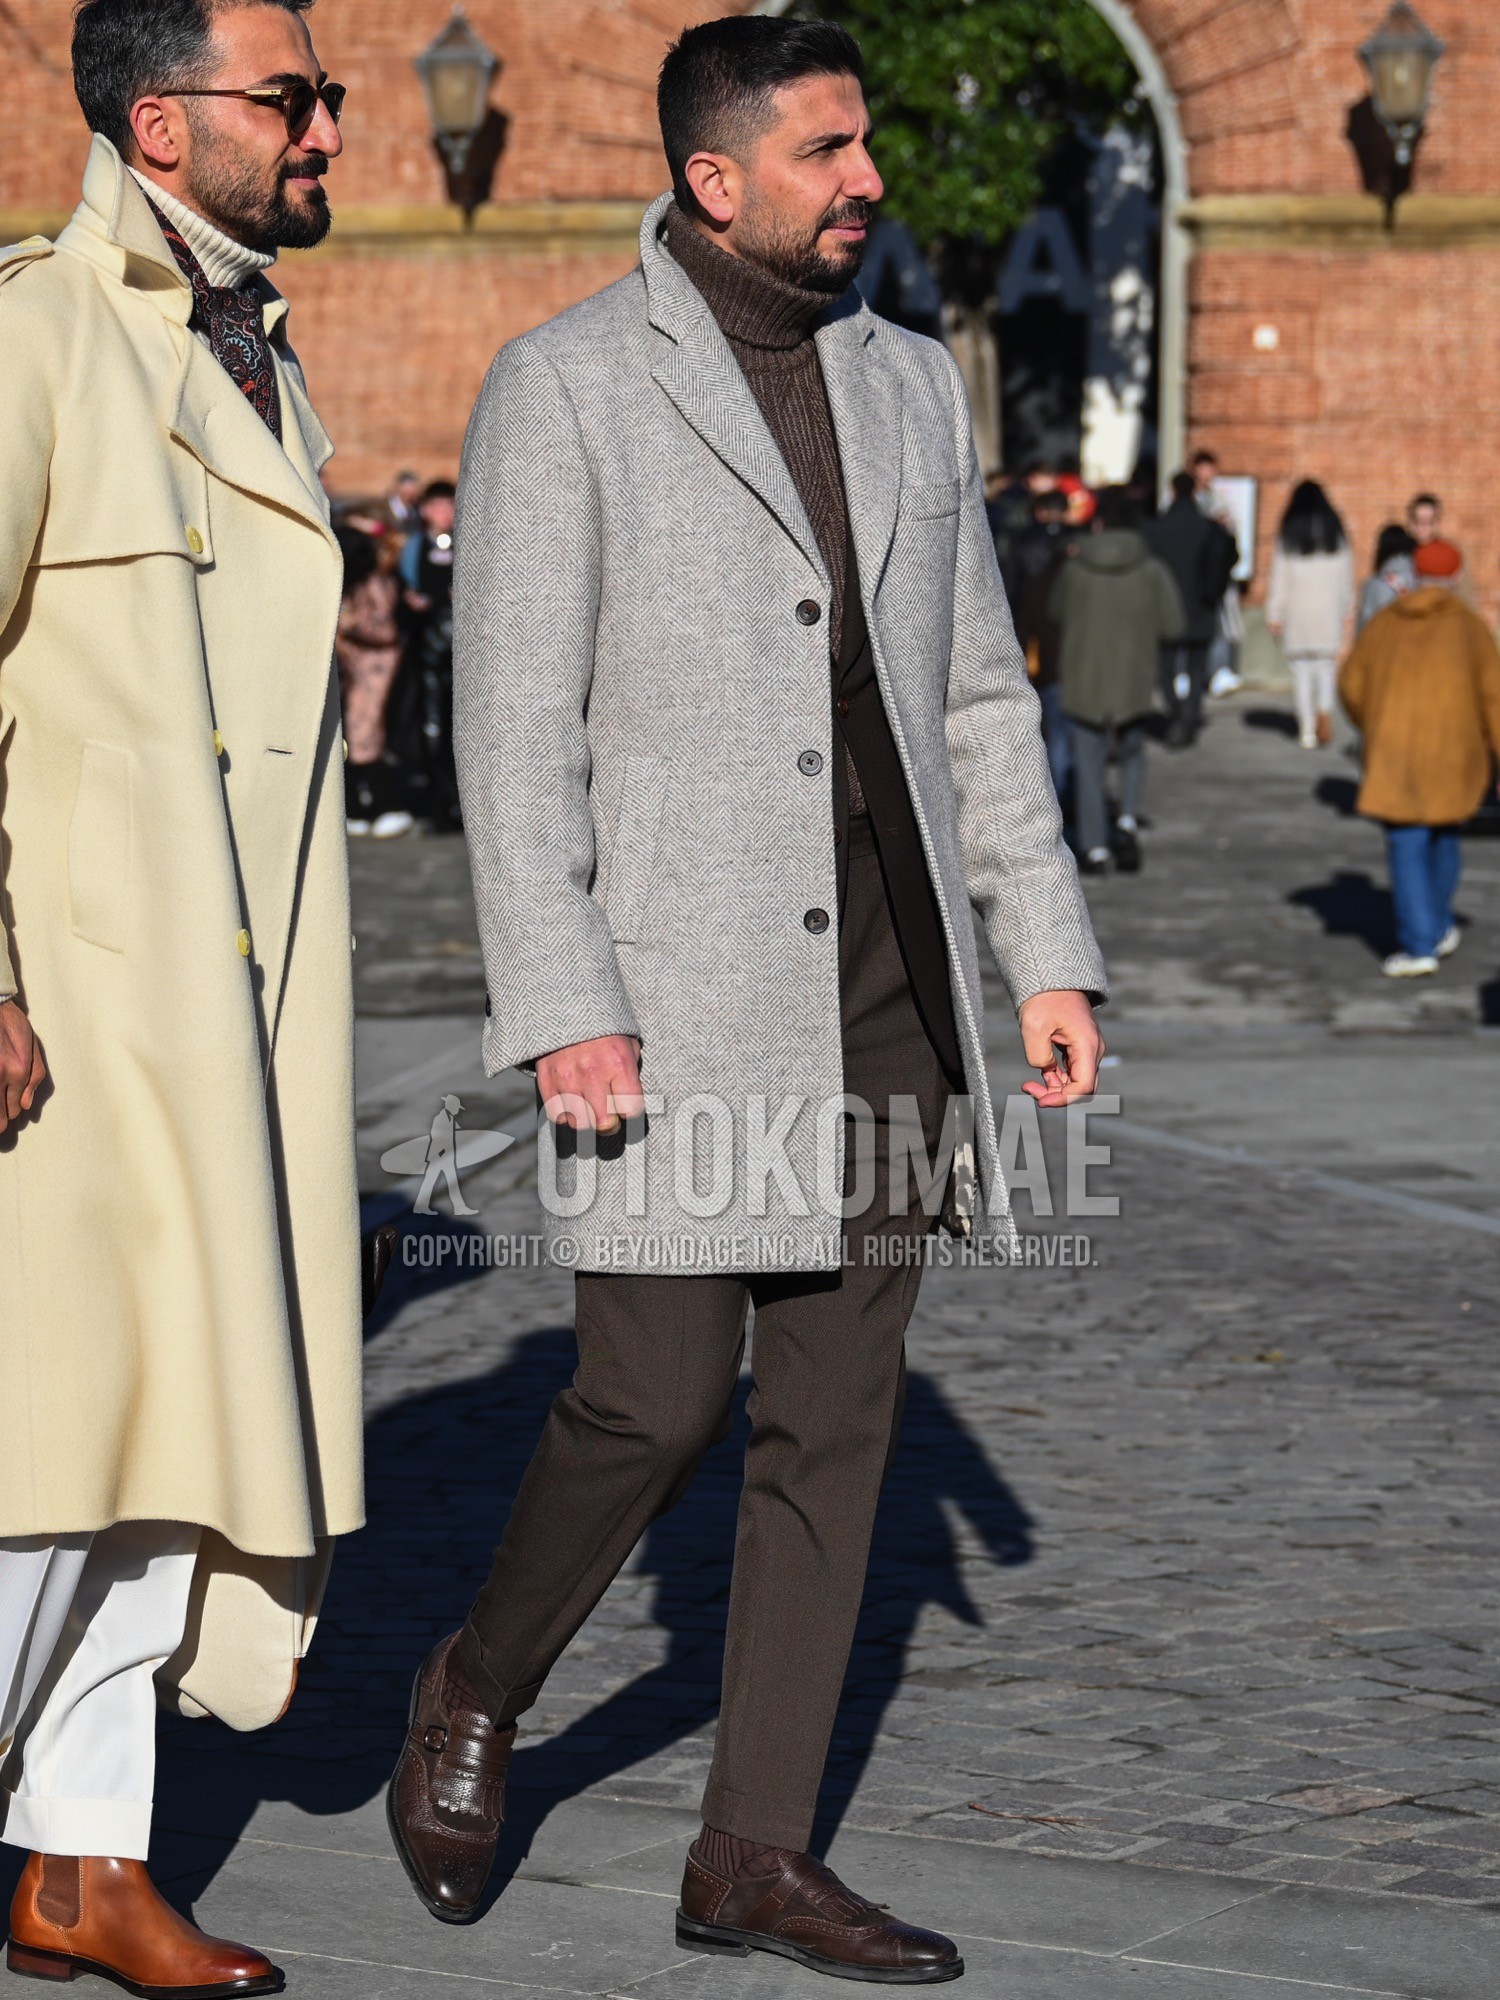 Men's autumn winter outfit with gray plain chester coat, brown plain turtleneck knit, brown plain ankle pants, brown plain slacks, brown plain socks, brown wing-tip shoes leather shoes.